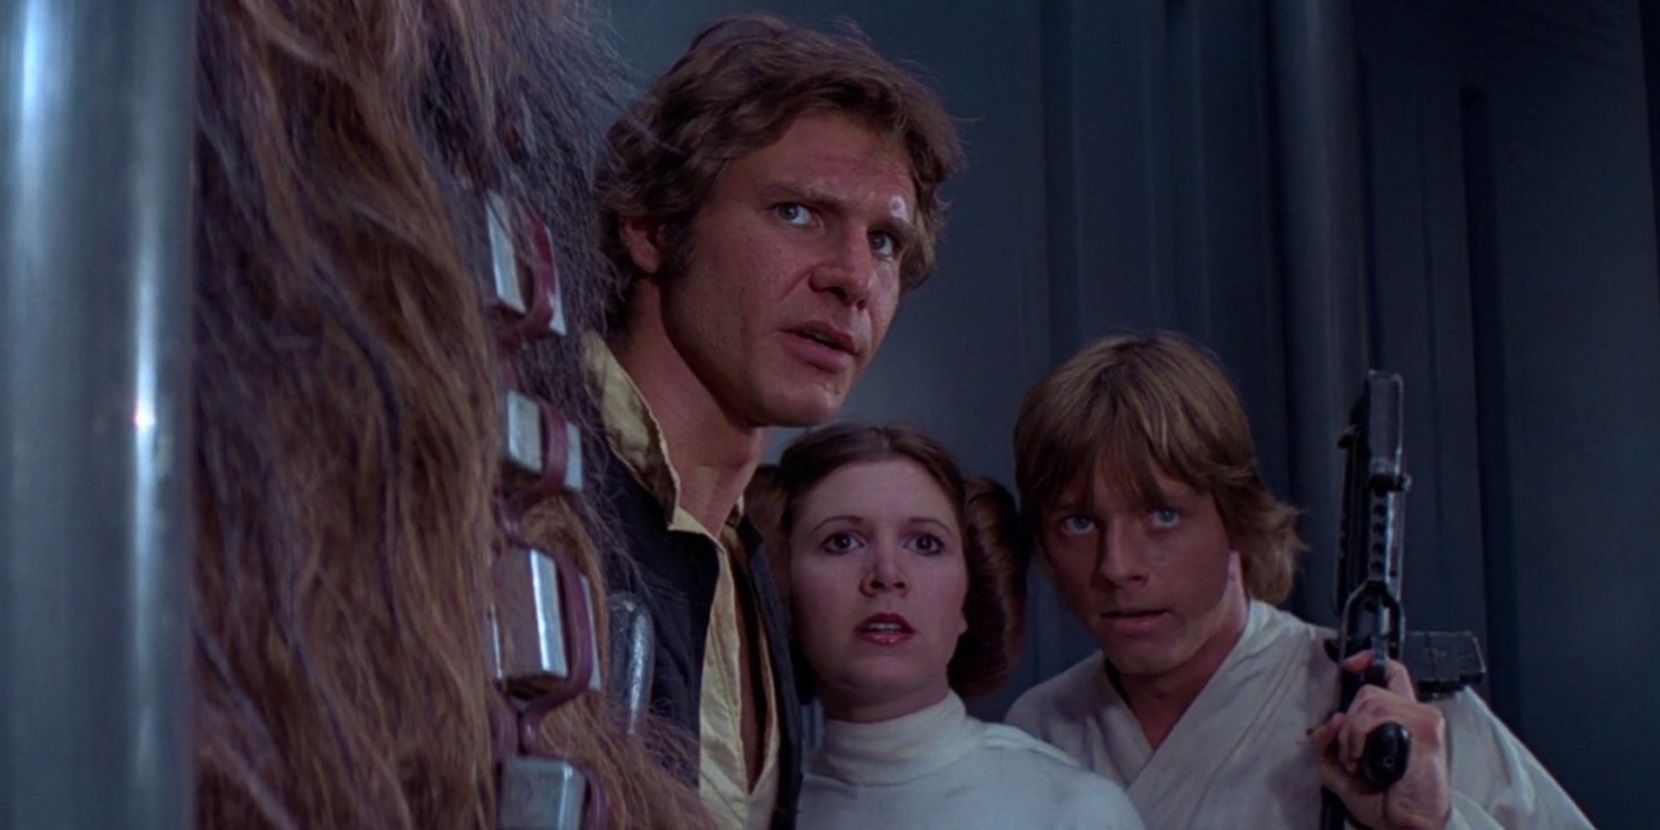 Han, Luke, and Leia hiding out on the Death Star in Star Wars